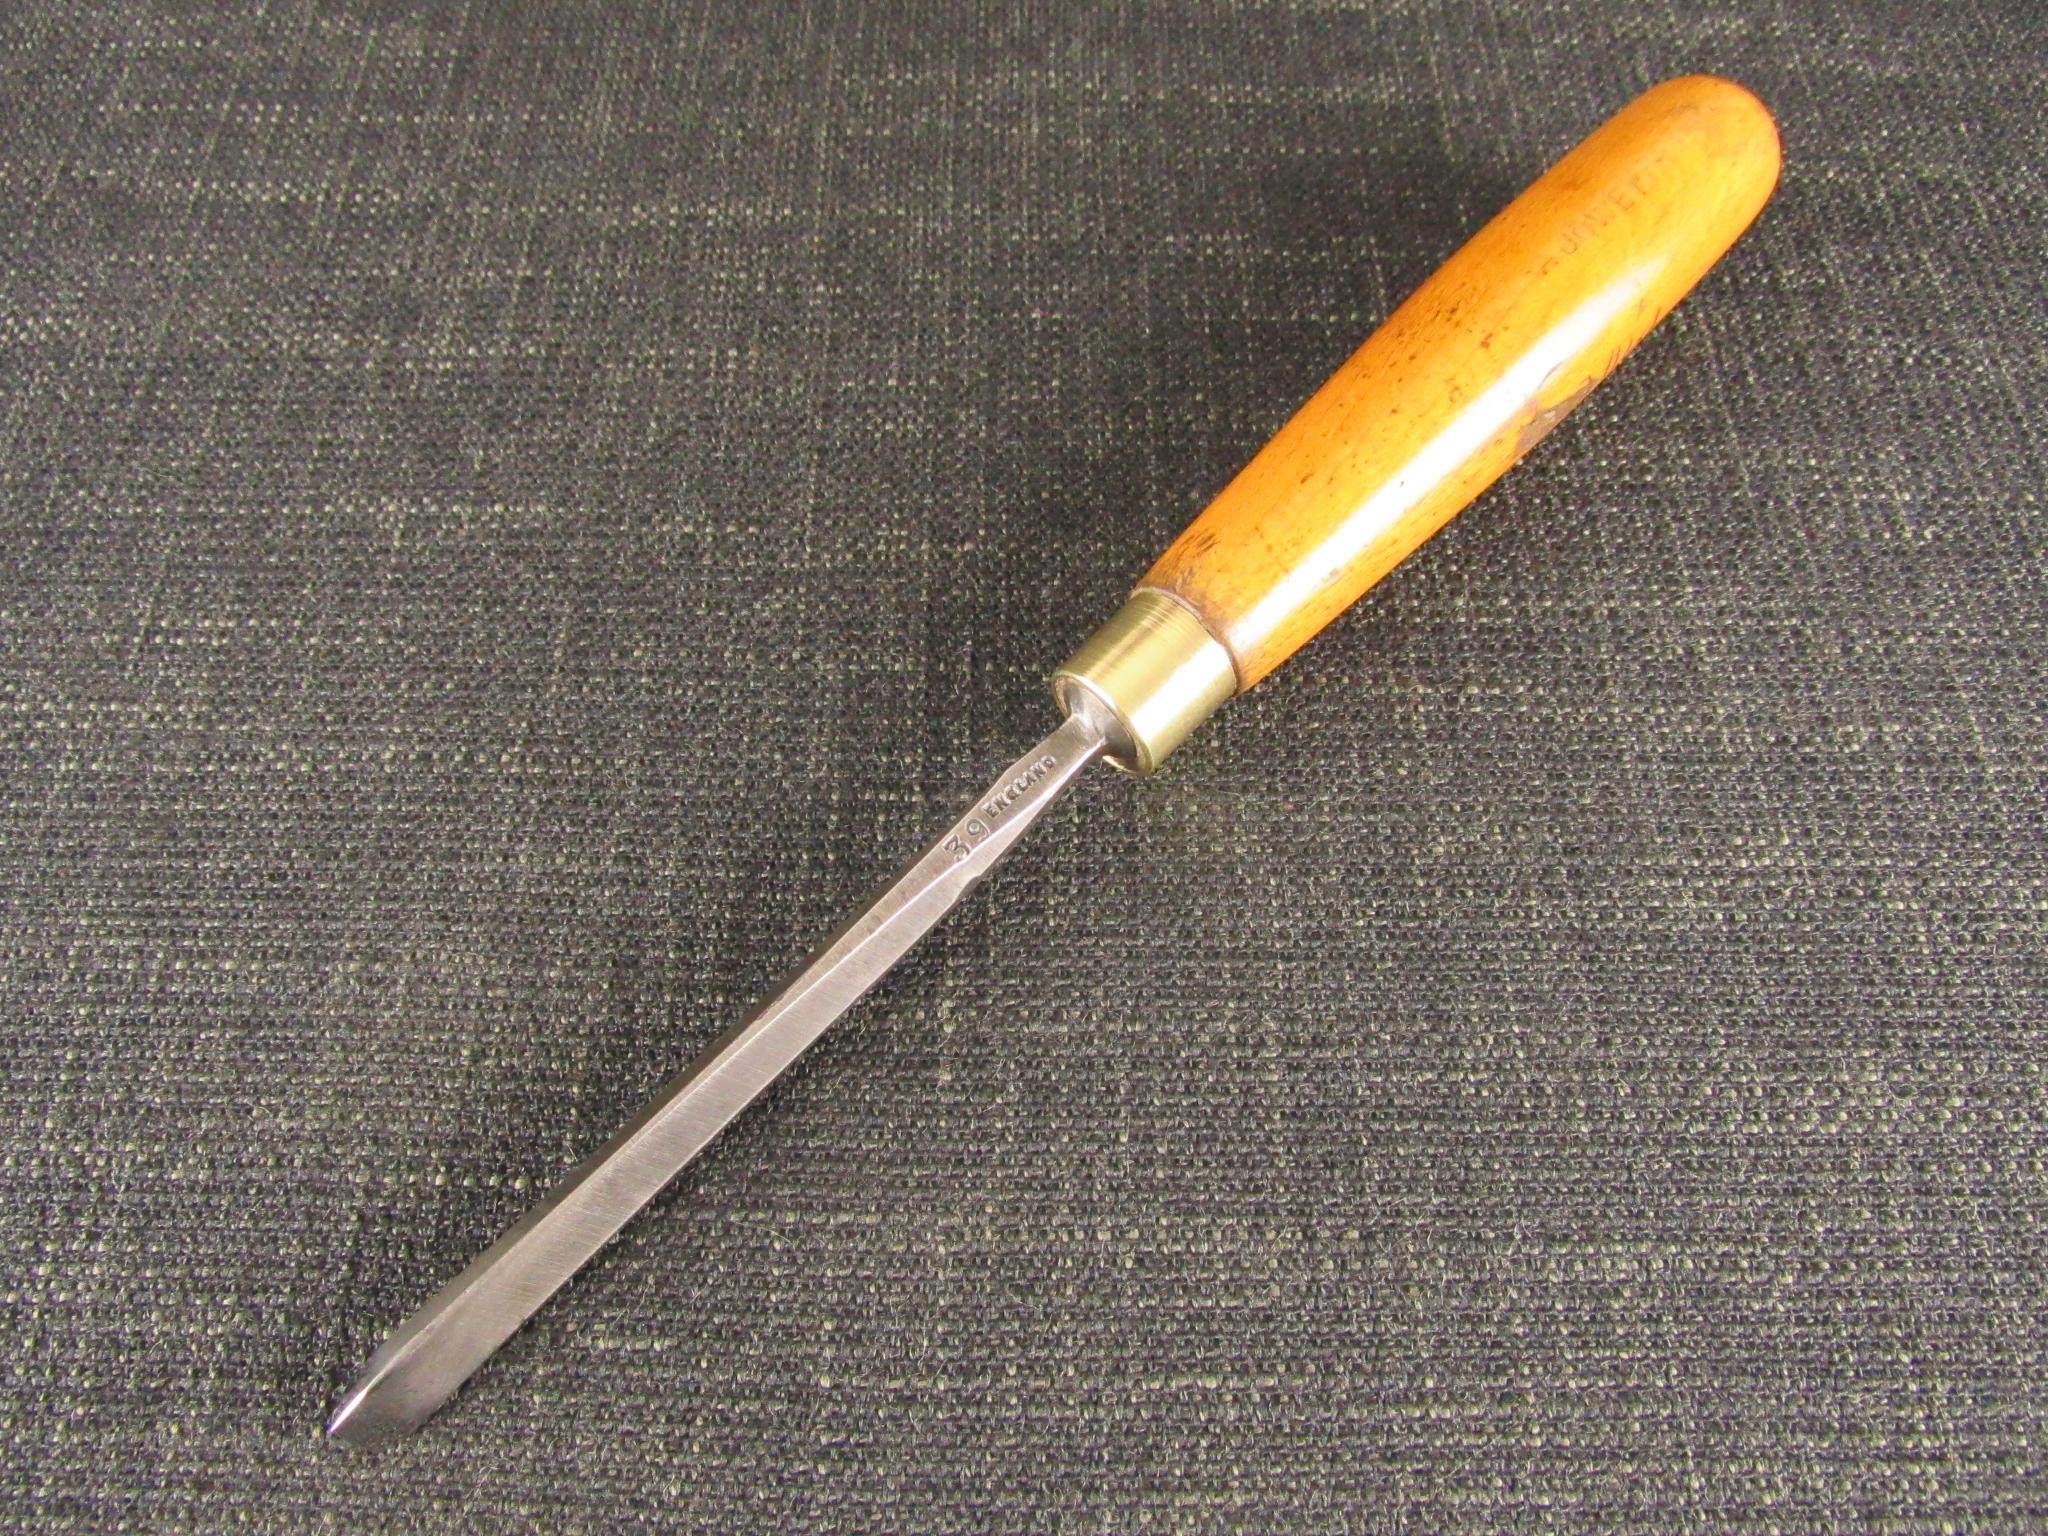 SJ ADDIS Vee Carving Tool or Parting Tool - 5/16" 7mm